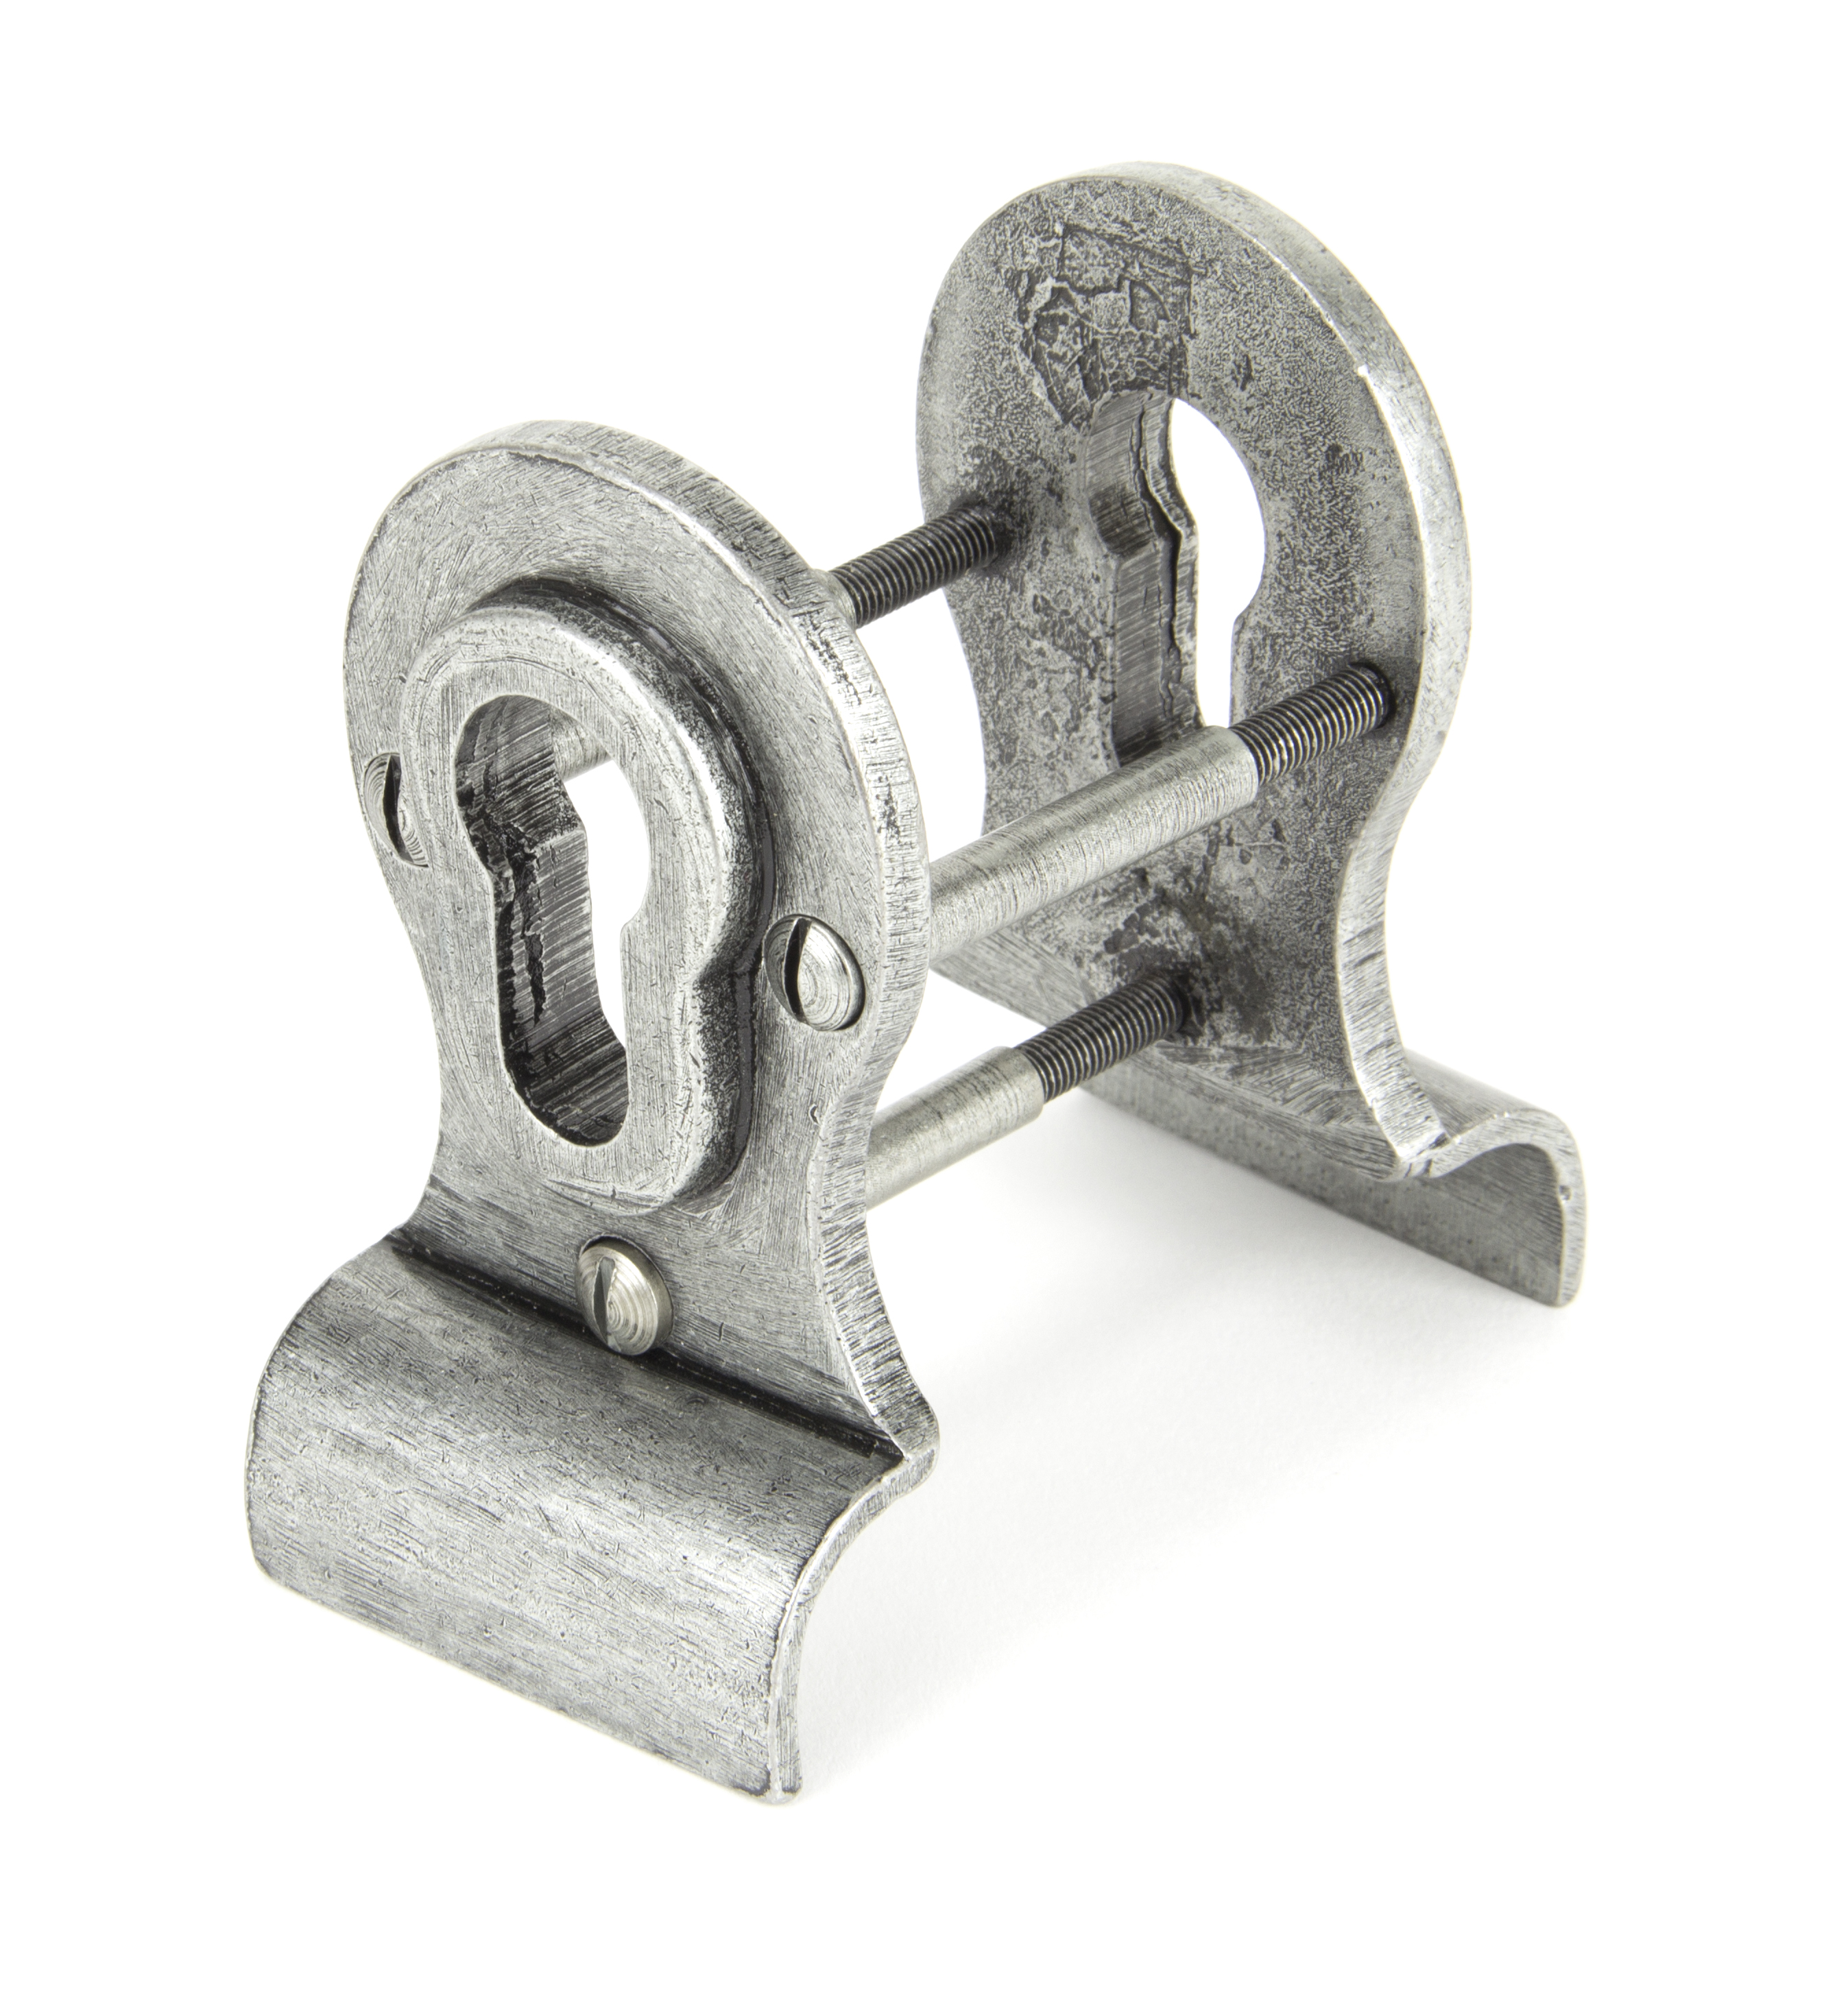 Euro Door Pull Back-to-back fixings - 50mm